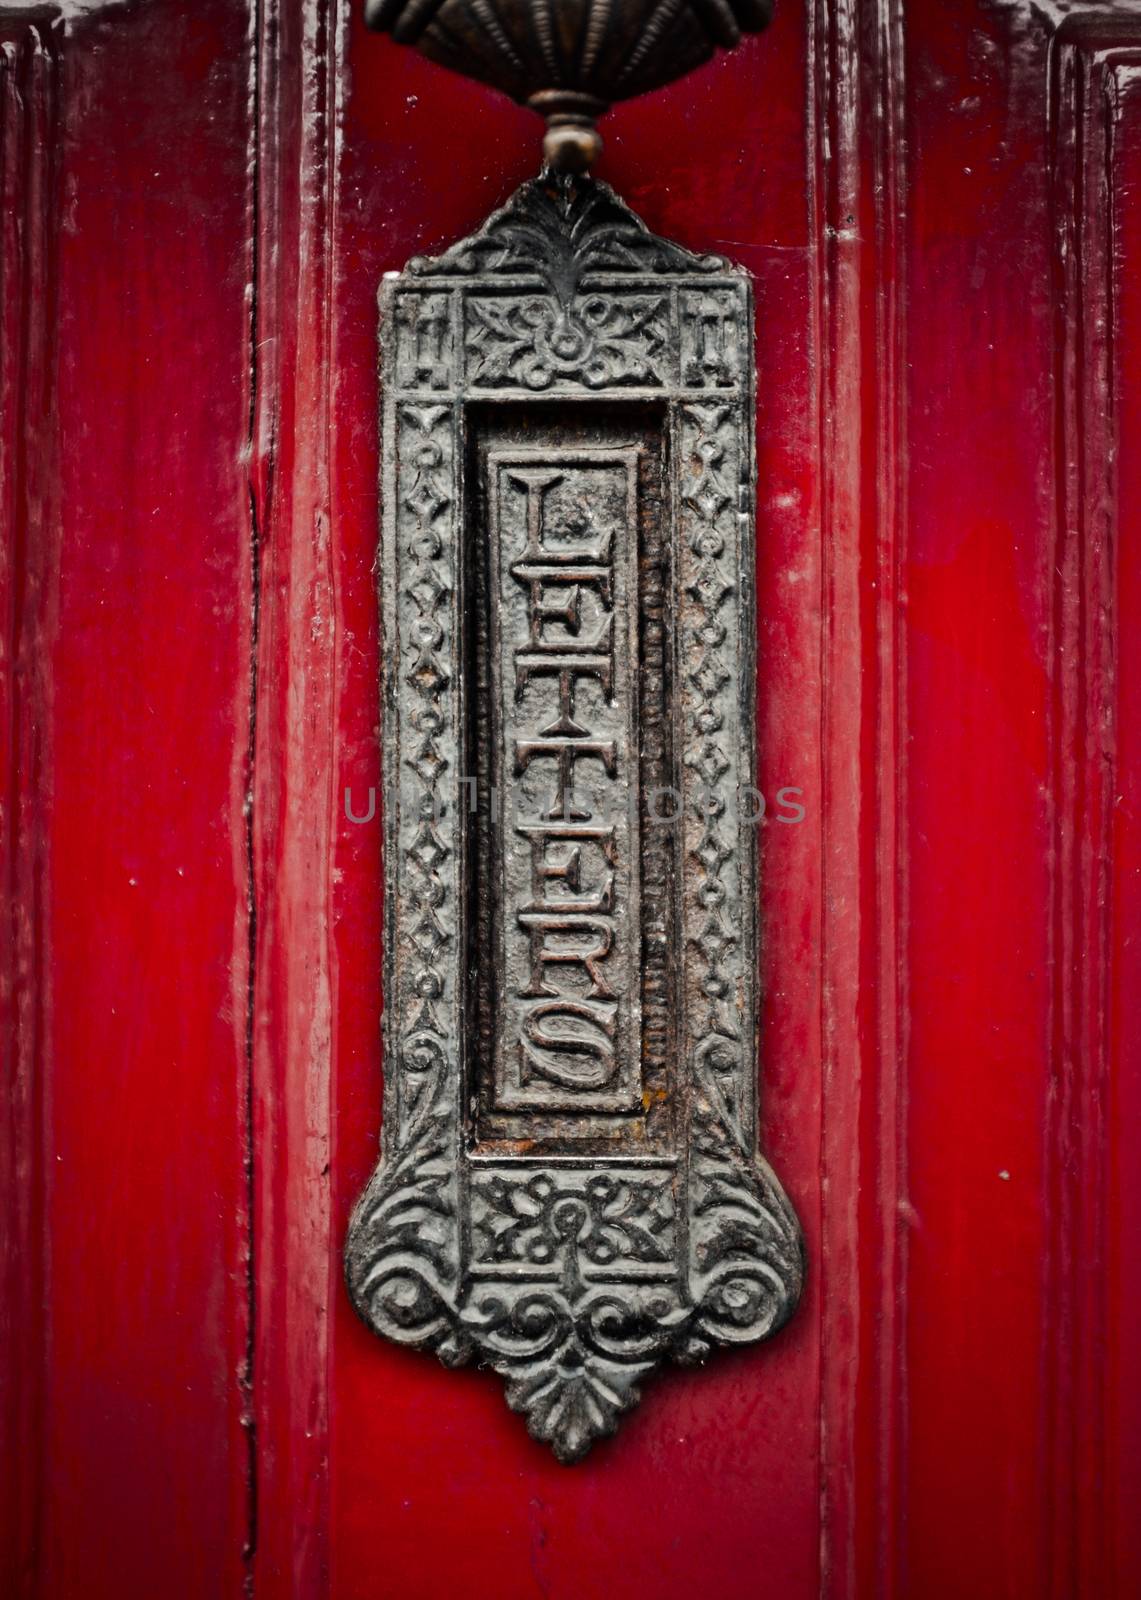 Ornate Old Fashioned British Letterbox Or Mailbox On A Red Front Door